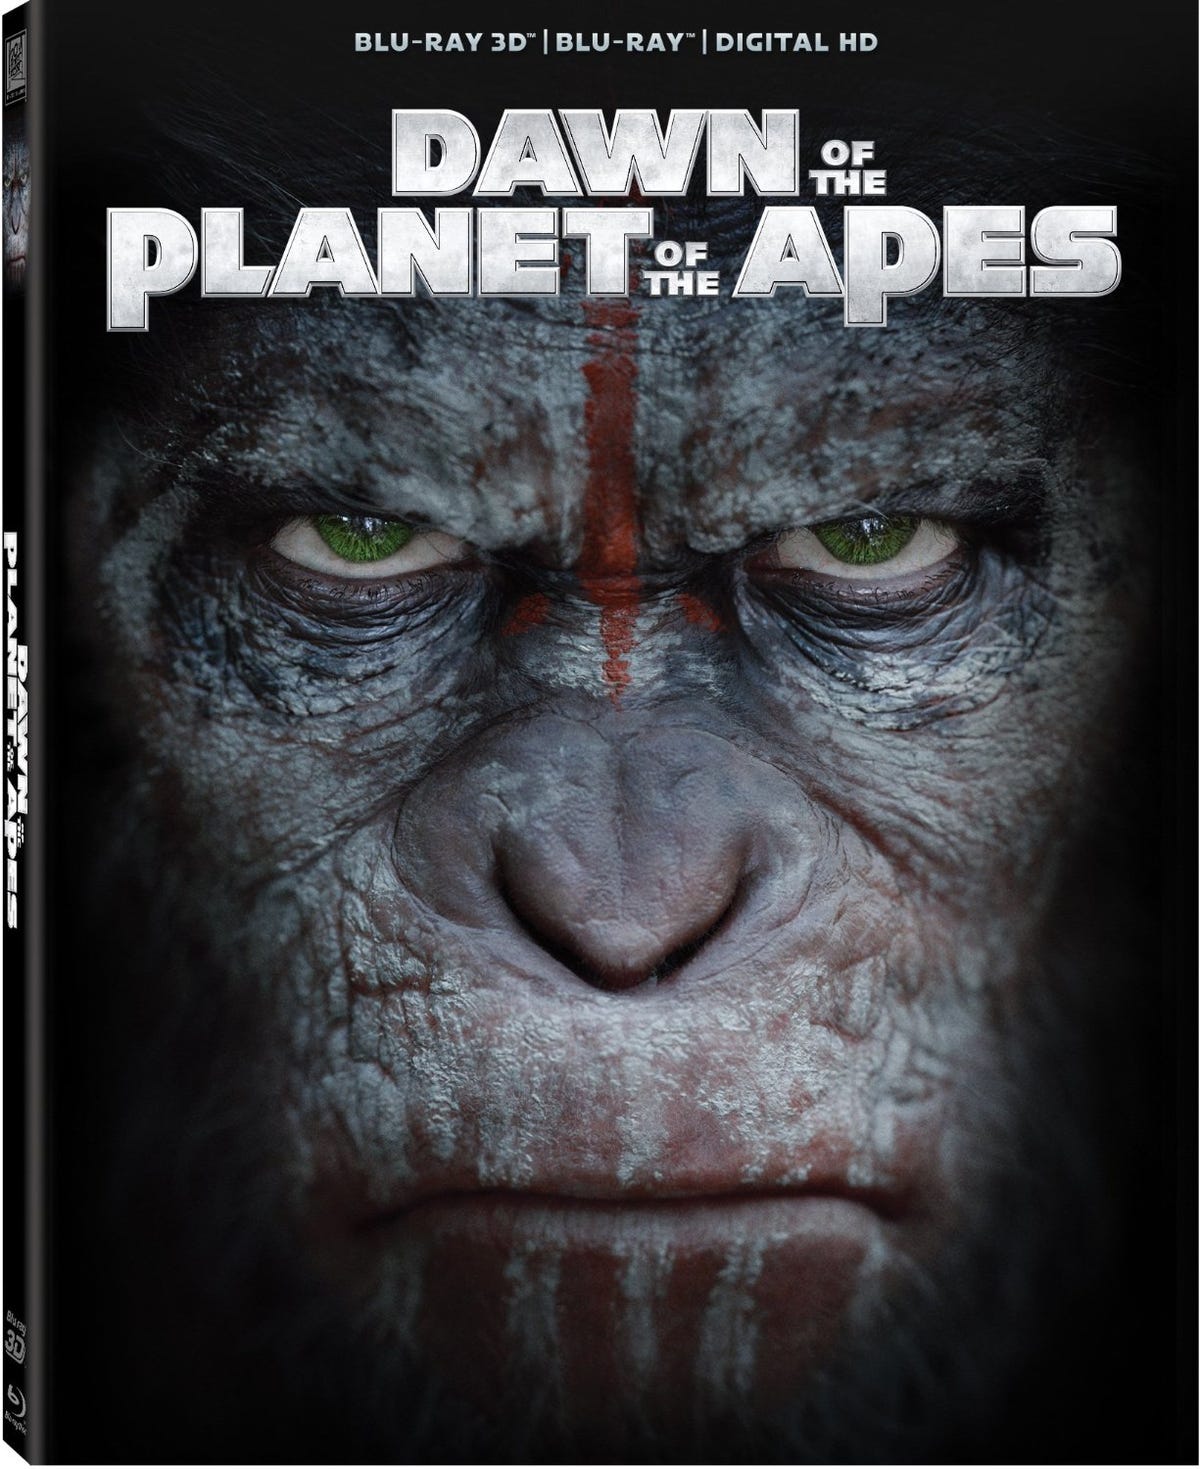 dawn-of-the-planet-of-the-apes-3d.jpg